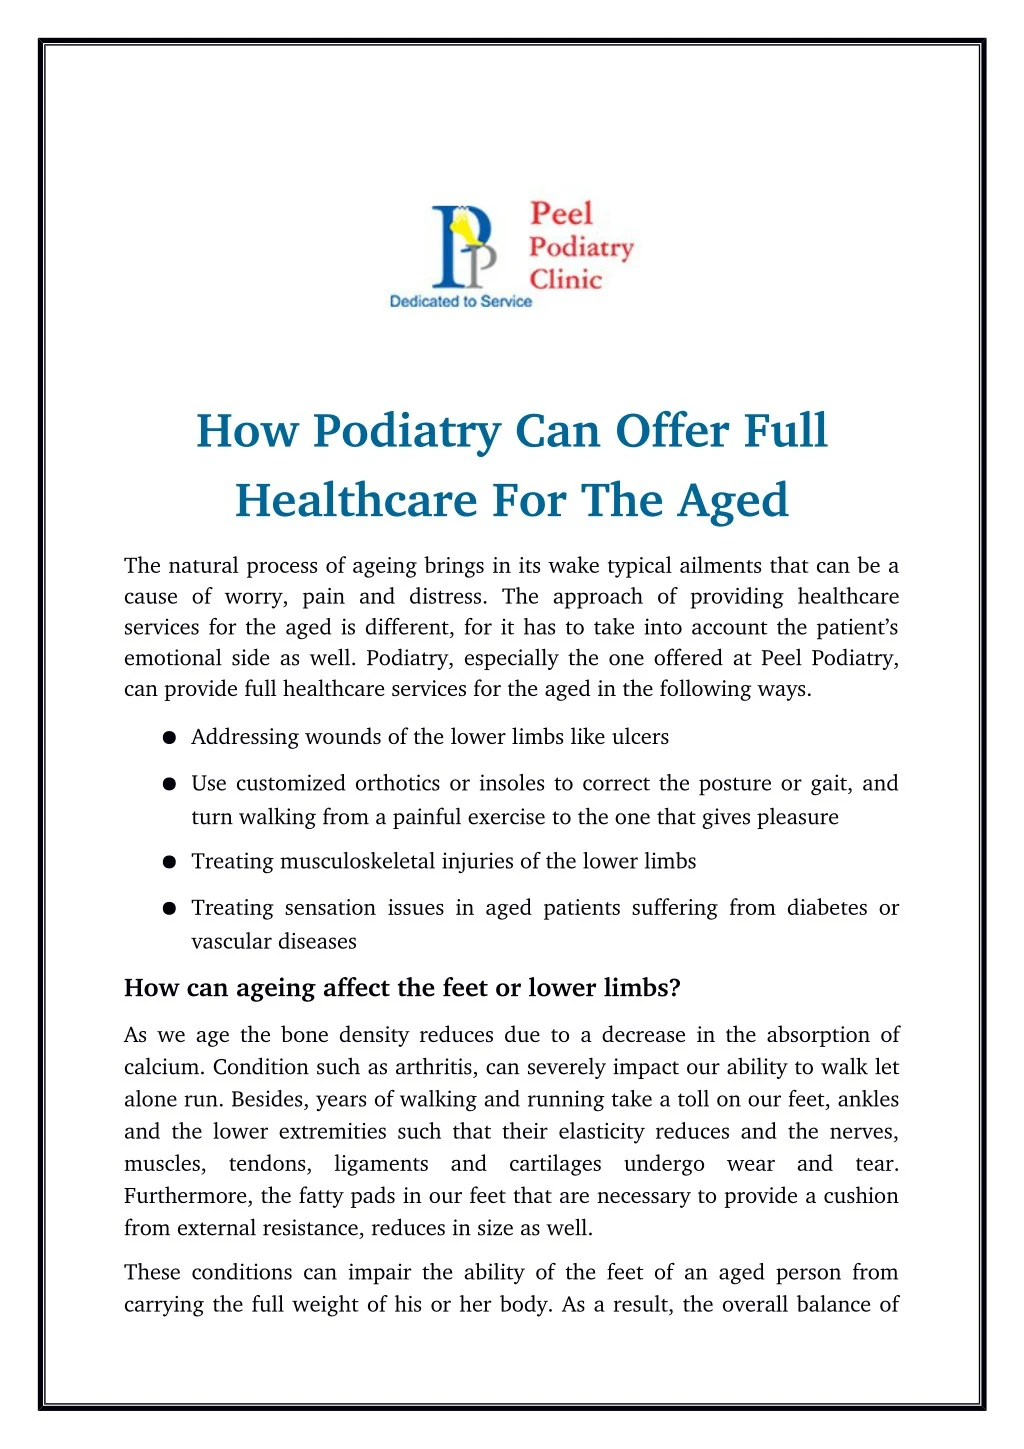 how podiatry can offer full healthcare